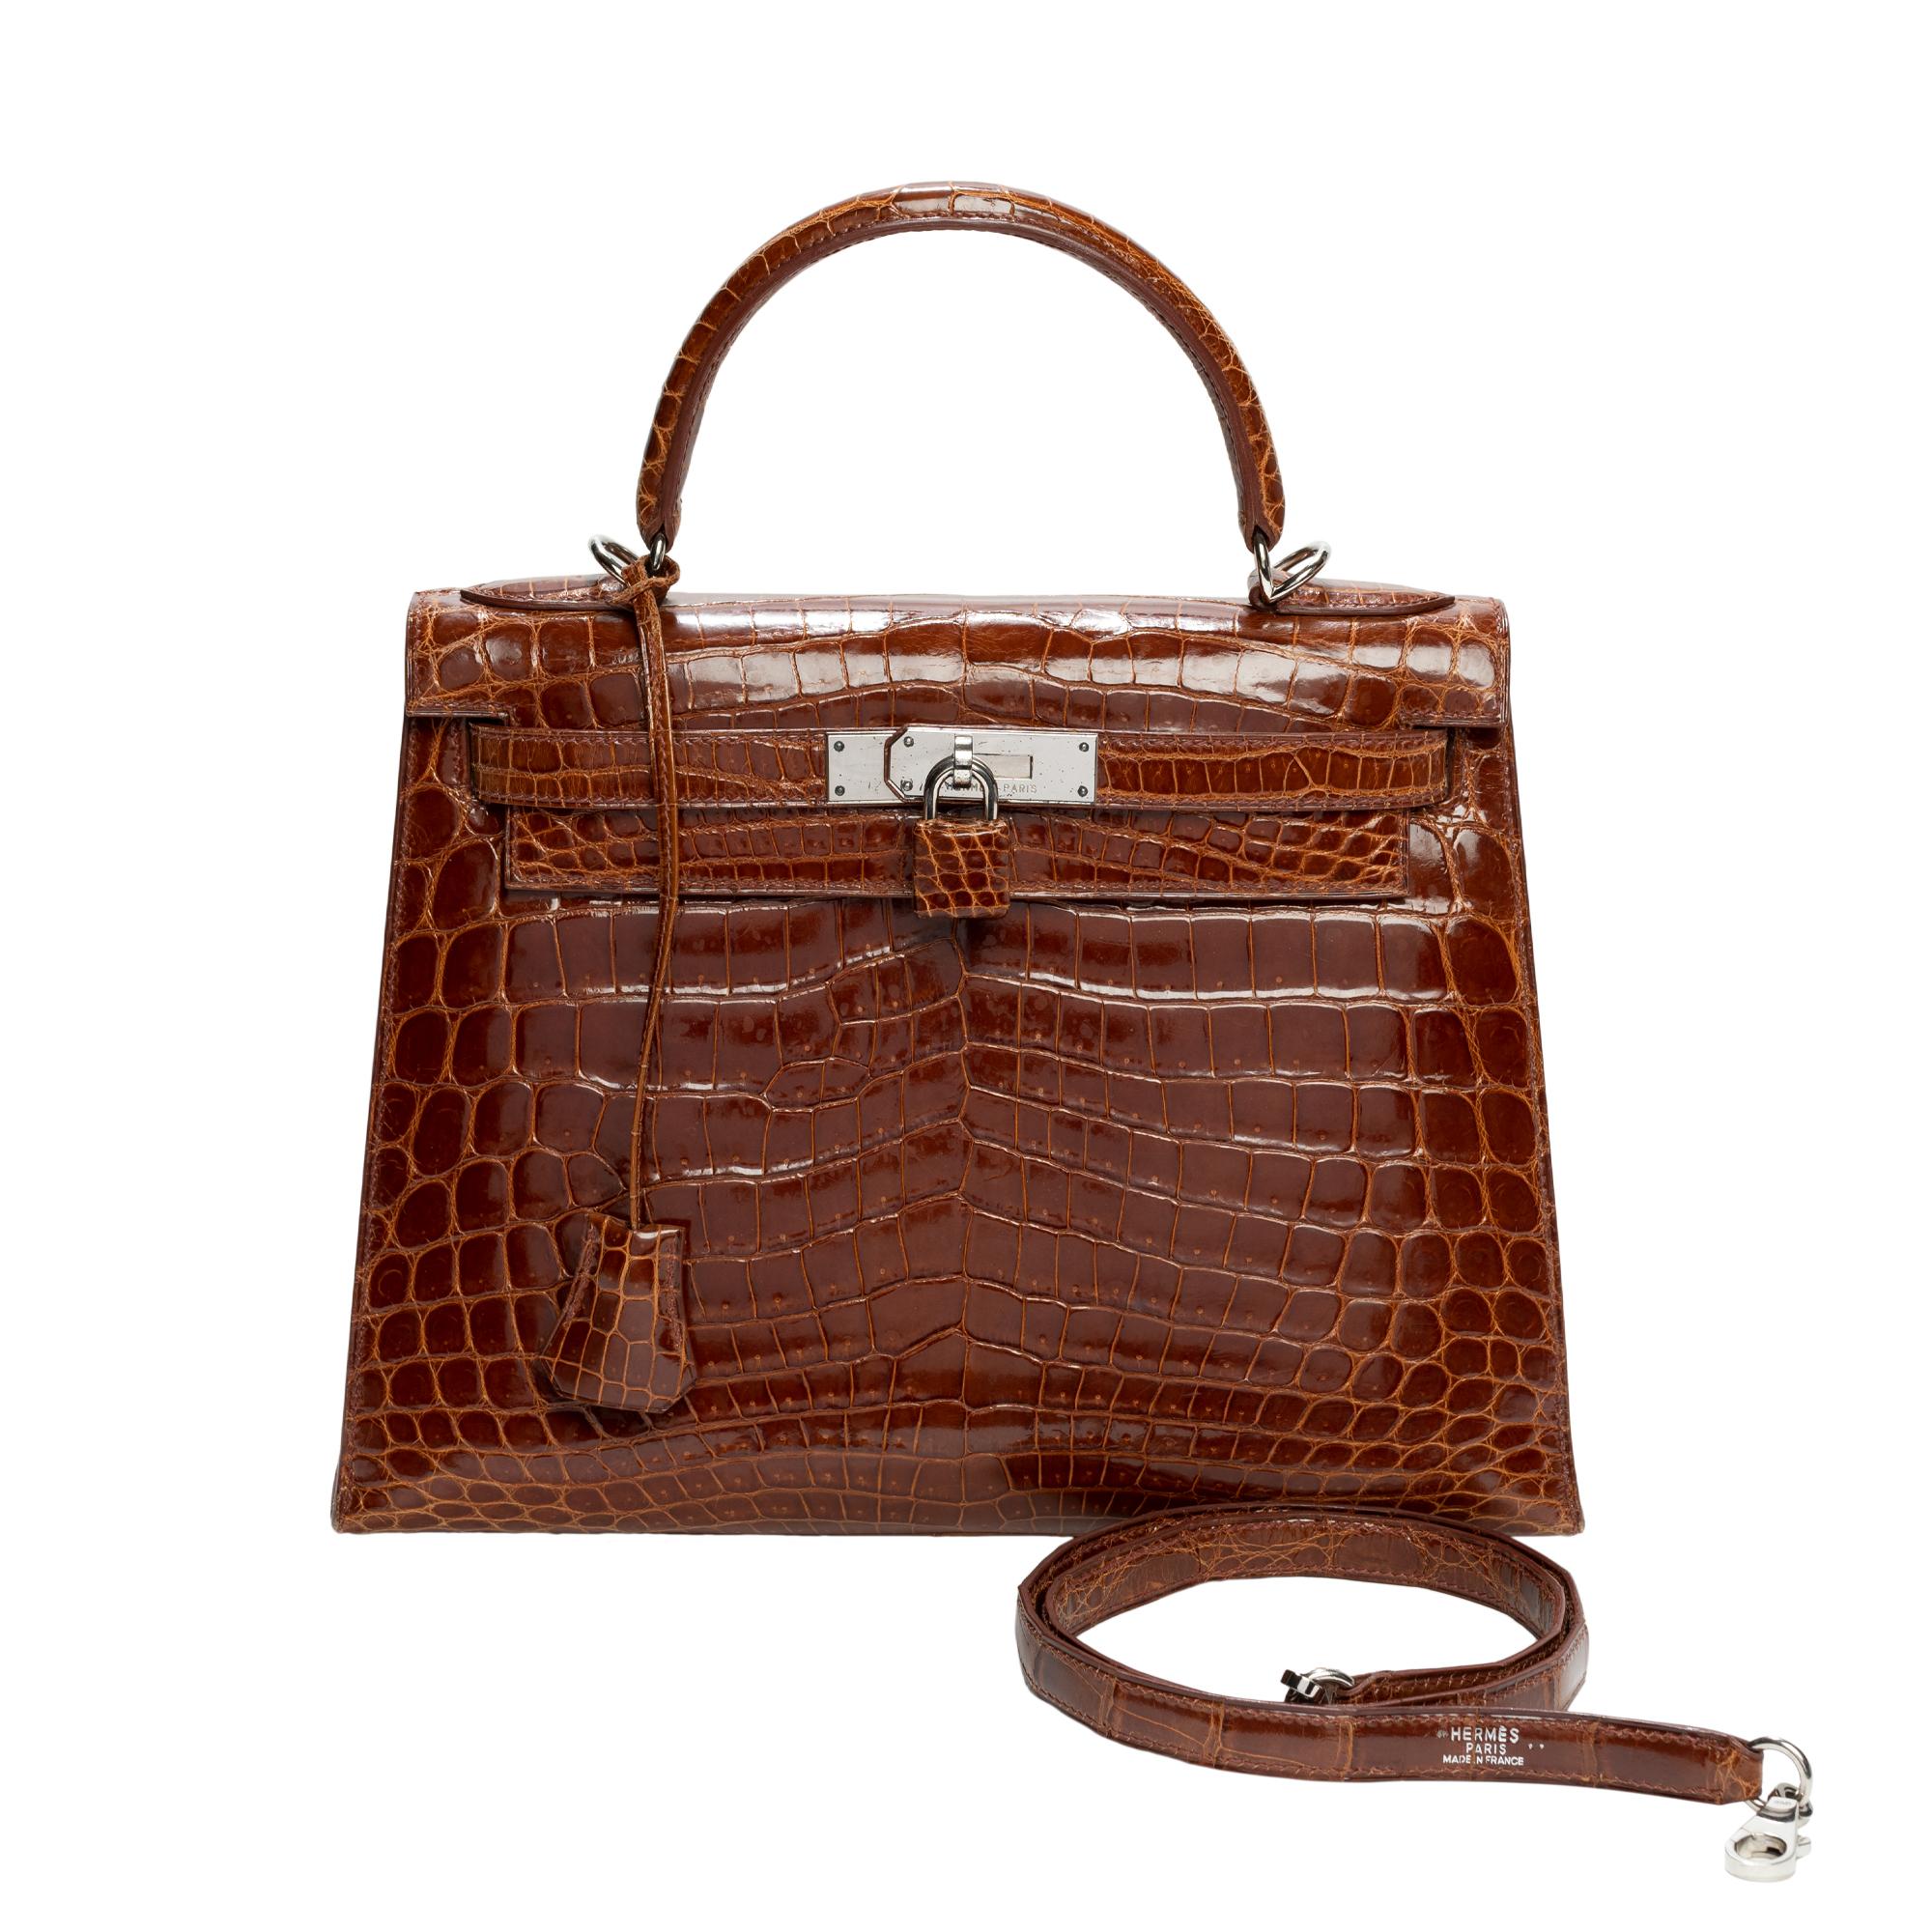 Here is a rare little gem that we are proud to present:
Hermes Kelly bag 28 sellier in crocodile color 